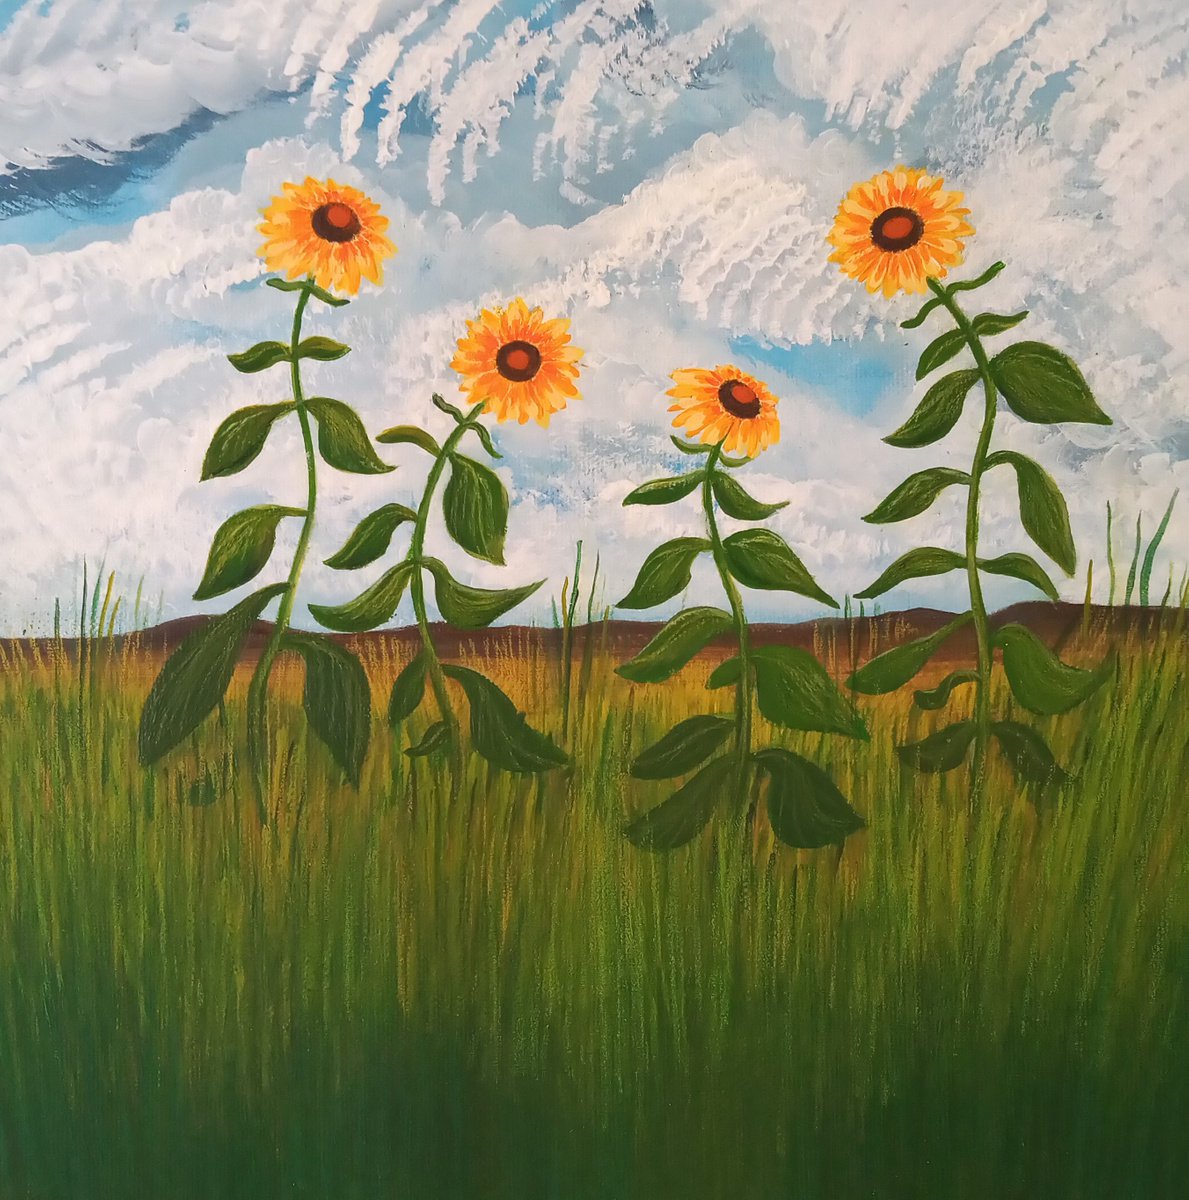 The Sunflowers by Jane Sutherland